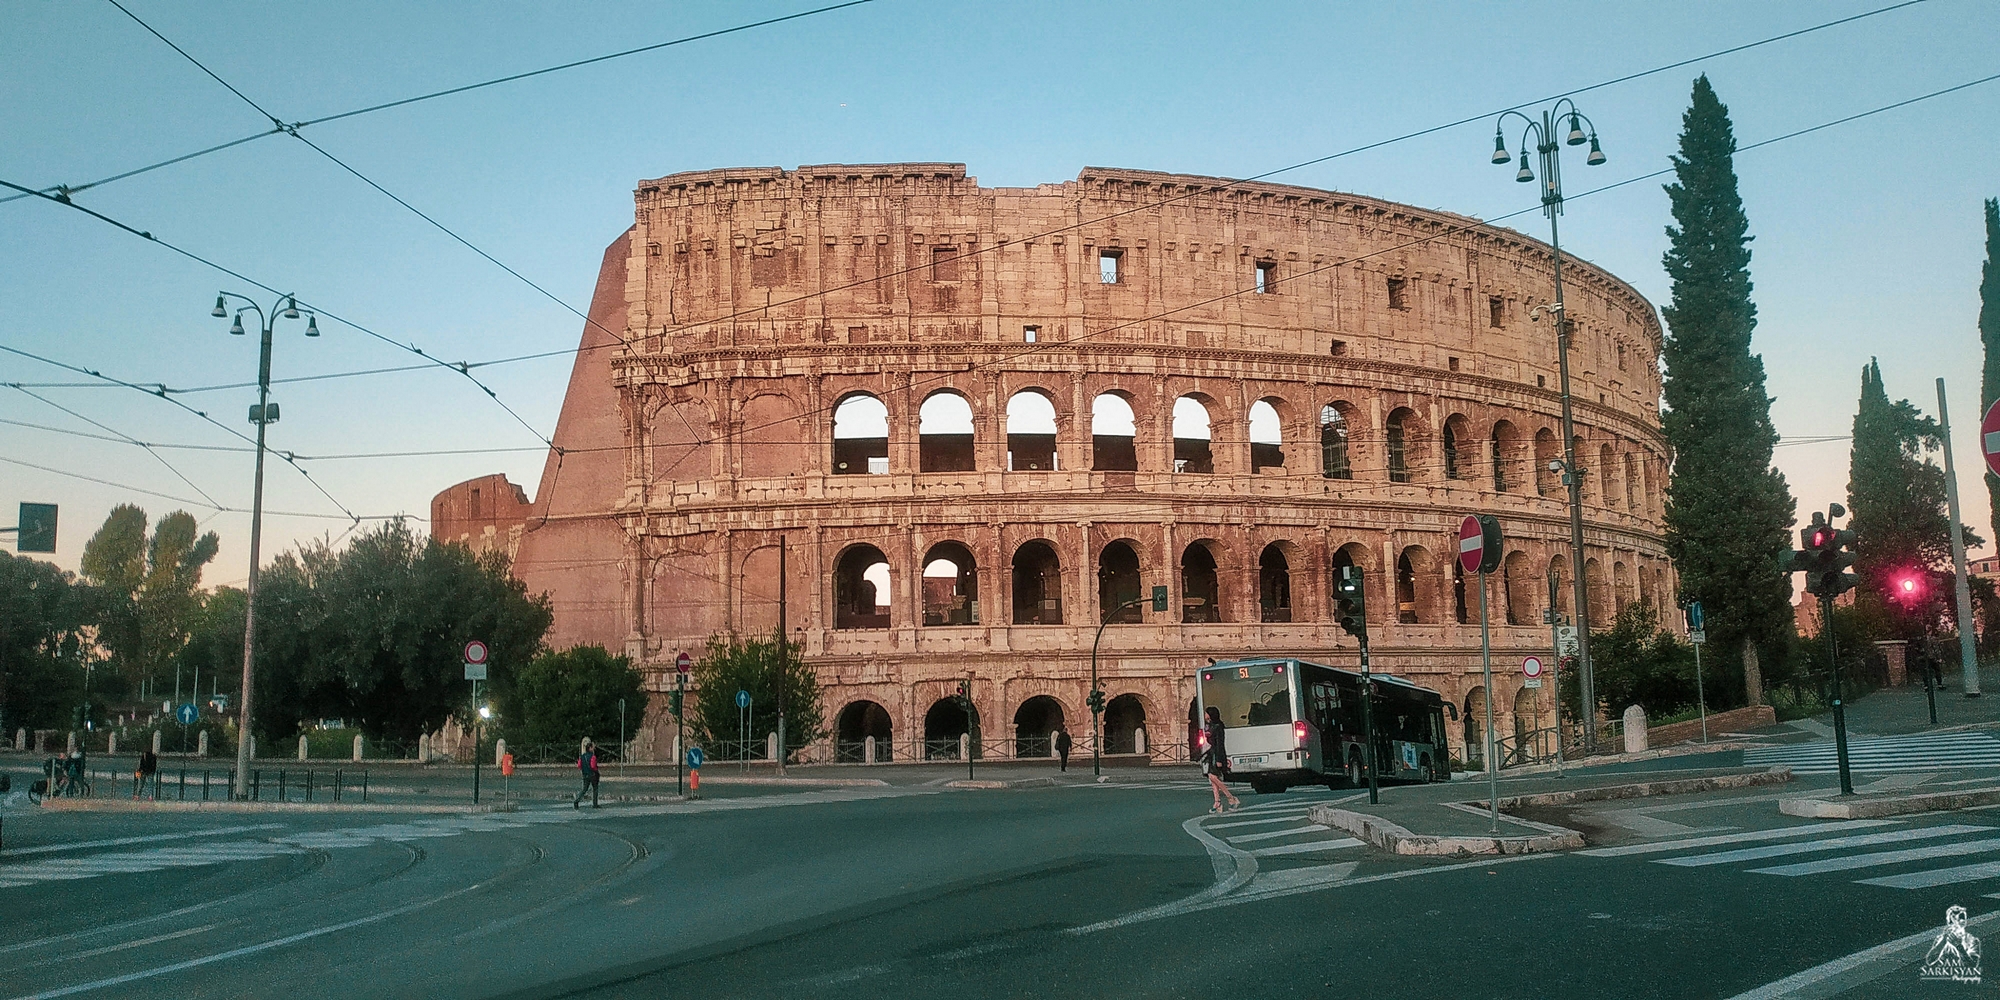 Early Morning Colosseum at 7:00 am